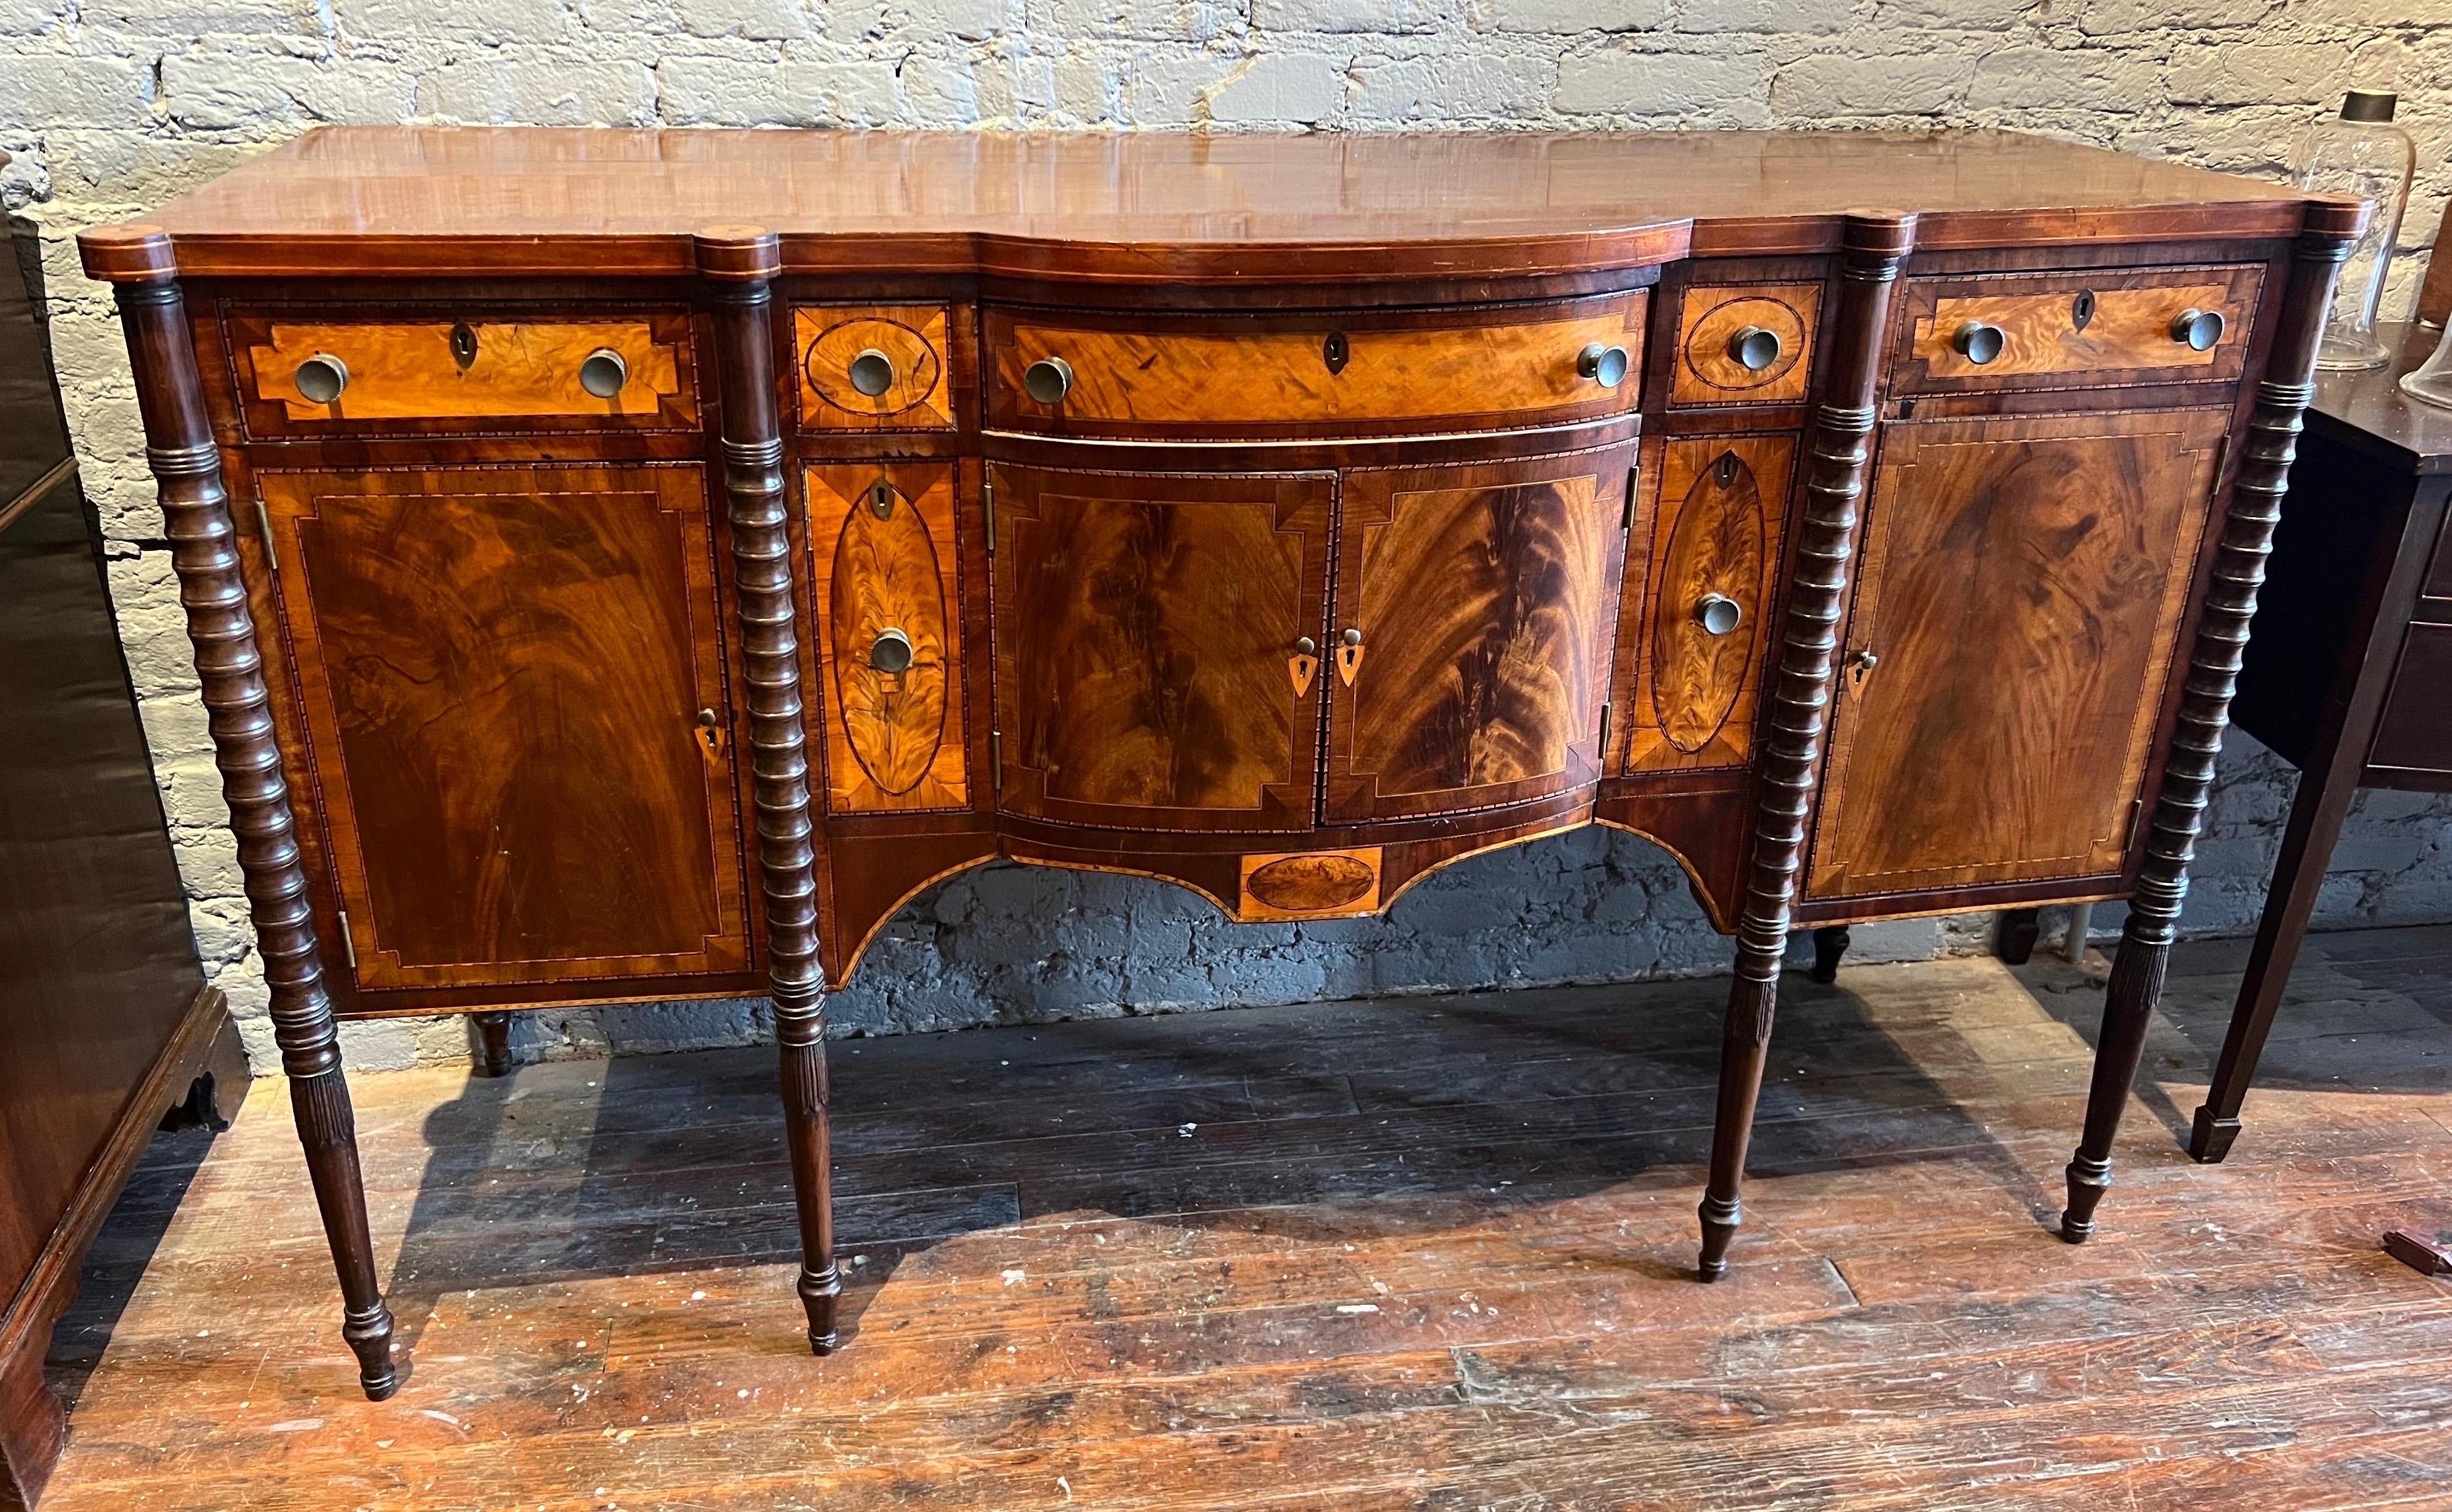 Very fine early 19th century Portsmouth, NH federal inlaid sideboard. Impressive inlays , fine quality crotch veneers, inlaid turrets with sand shading, beautifully turned legs. 